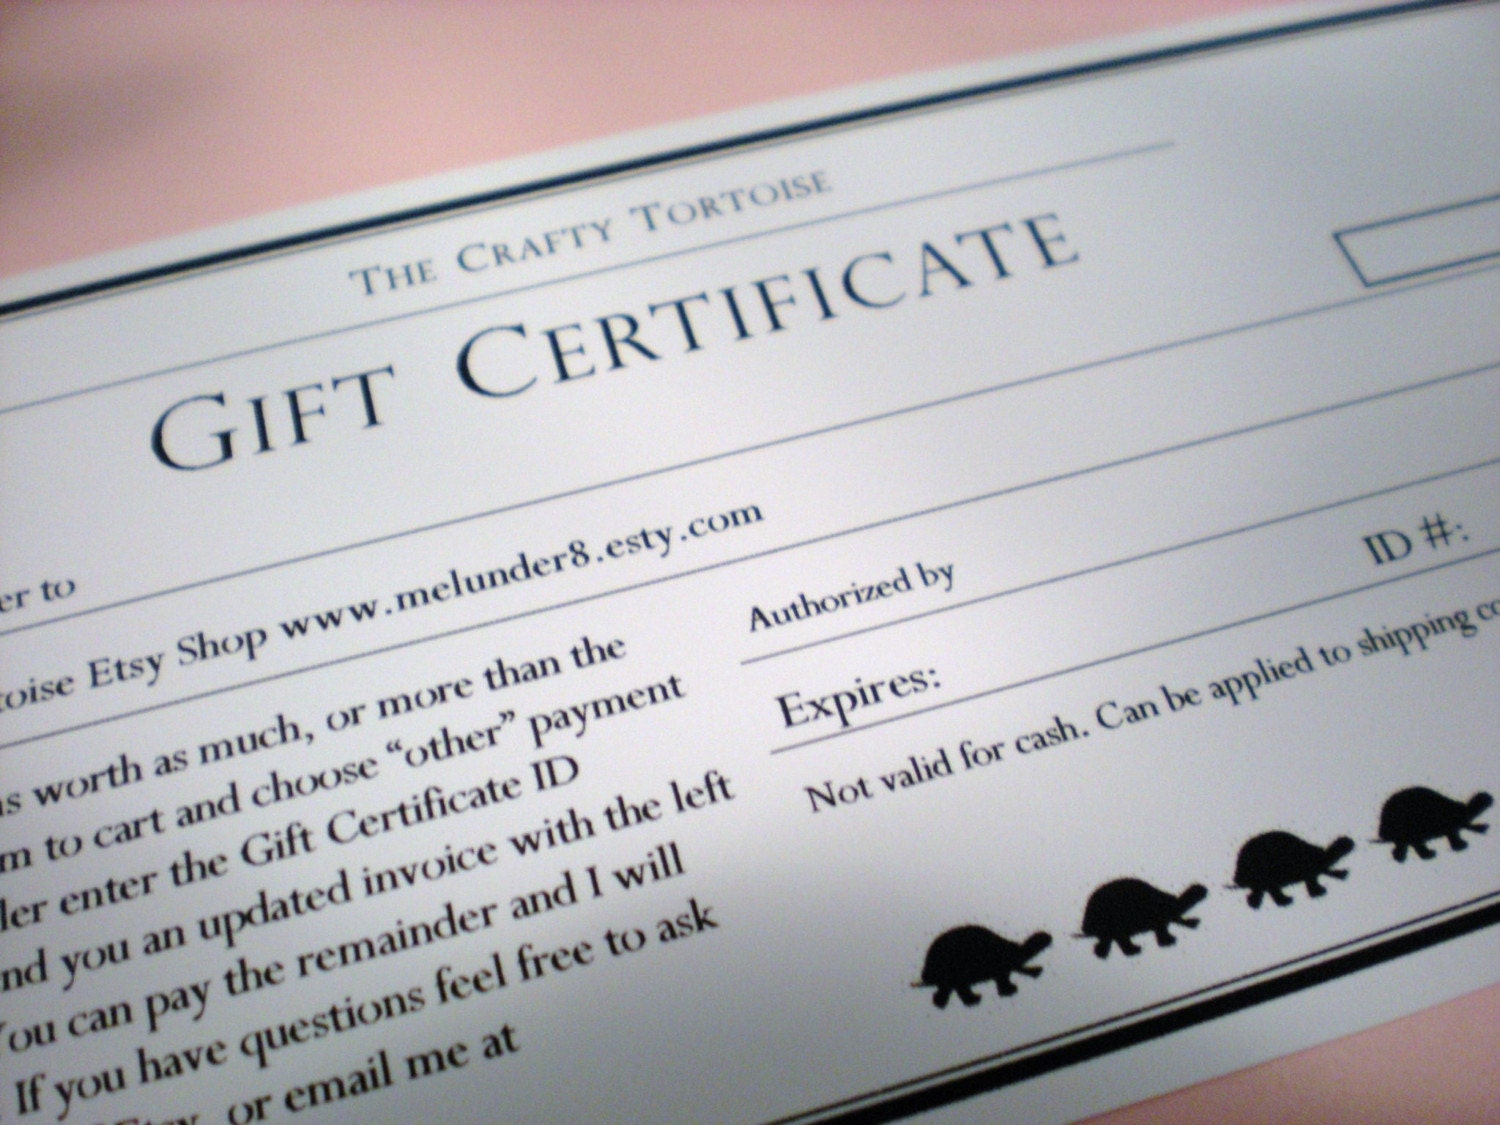 The Crafty Tortoise Gift Certificate